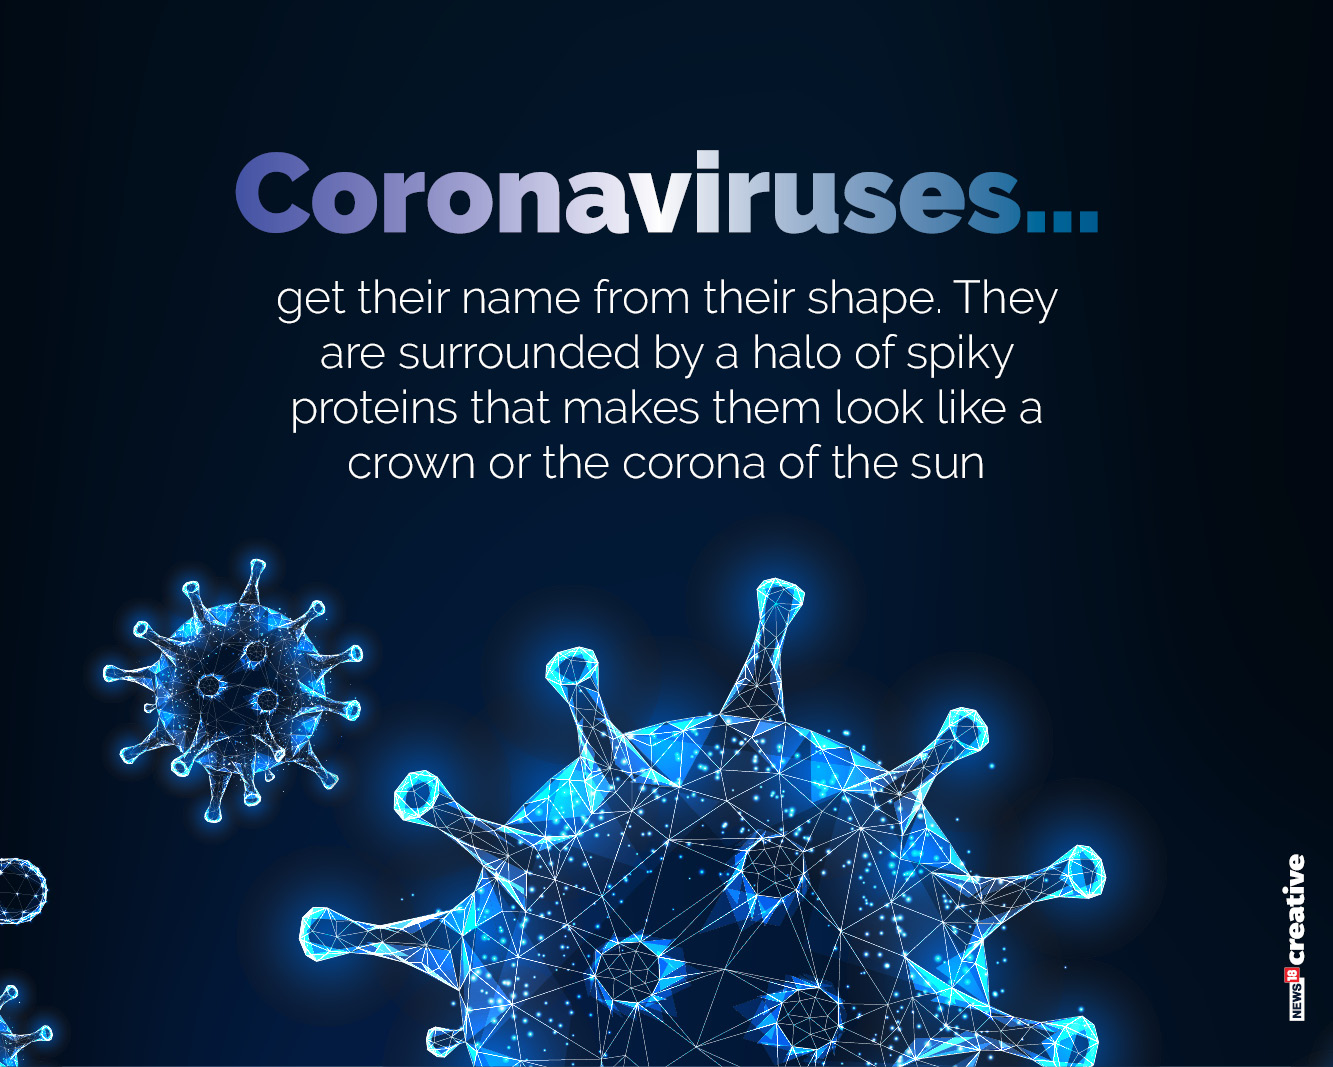 How to stay safe from the Coronavirus